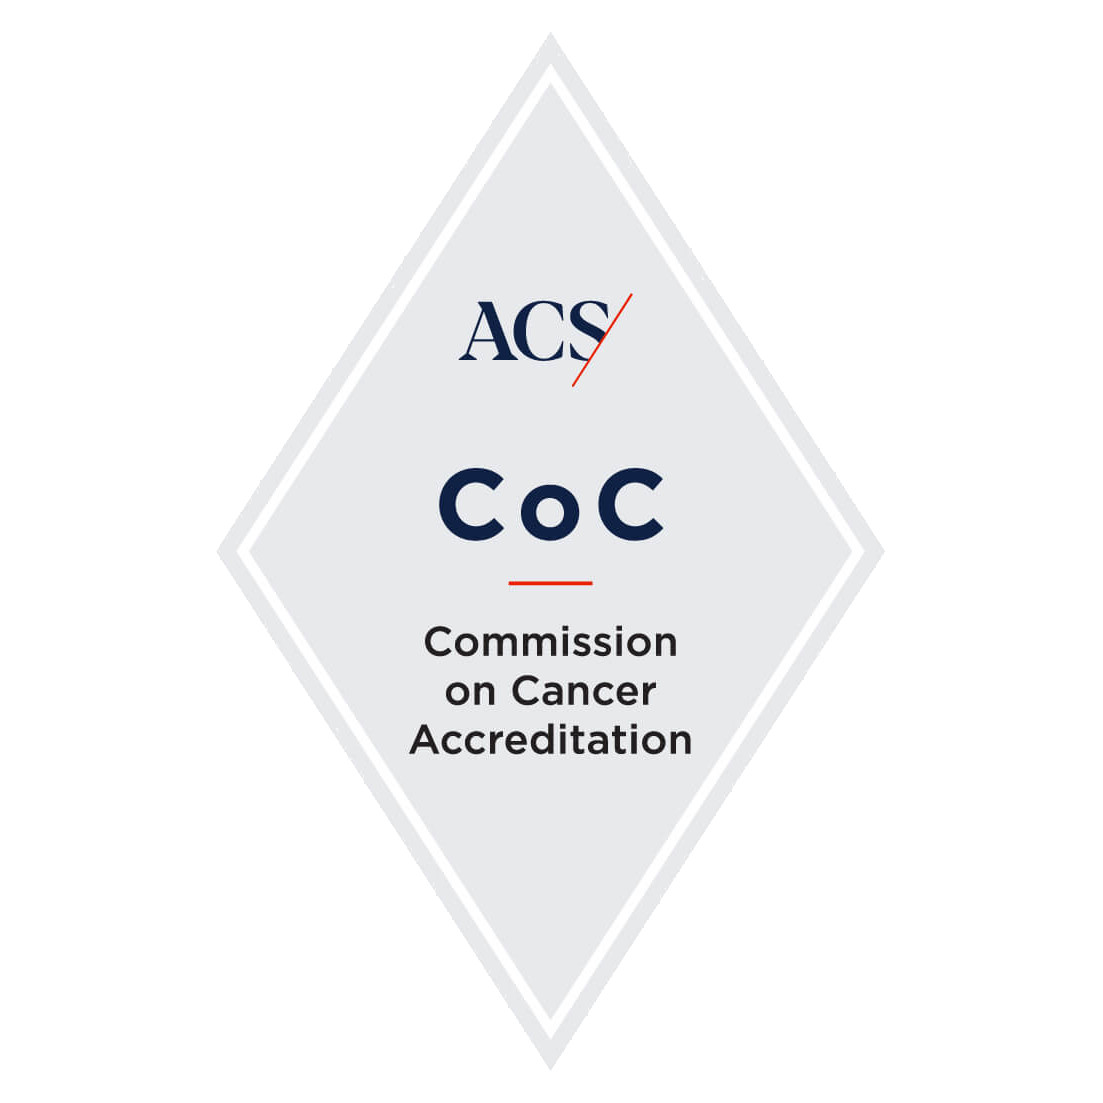 ACS - CoC - Commission on Cancer Accreditation.